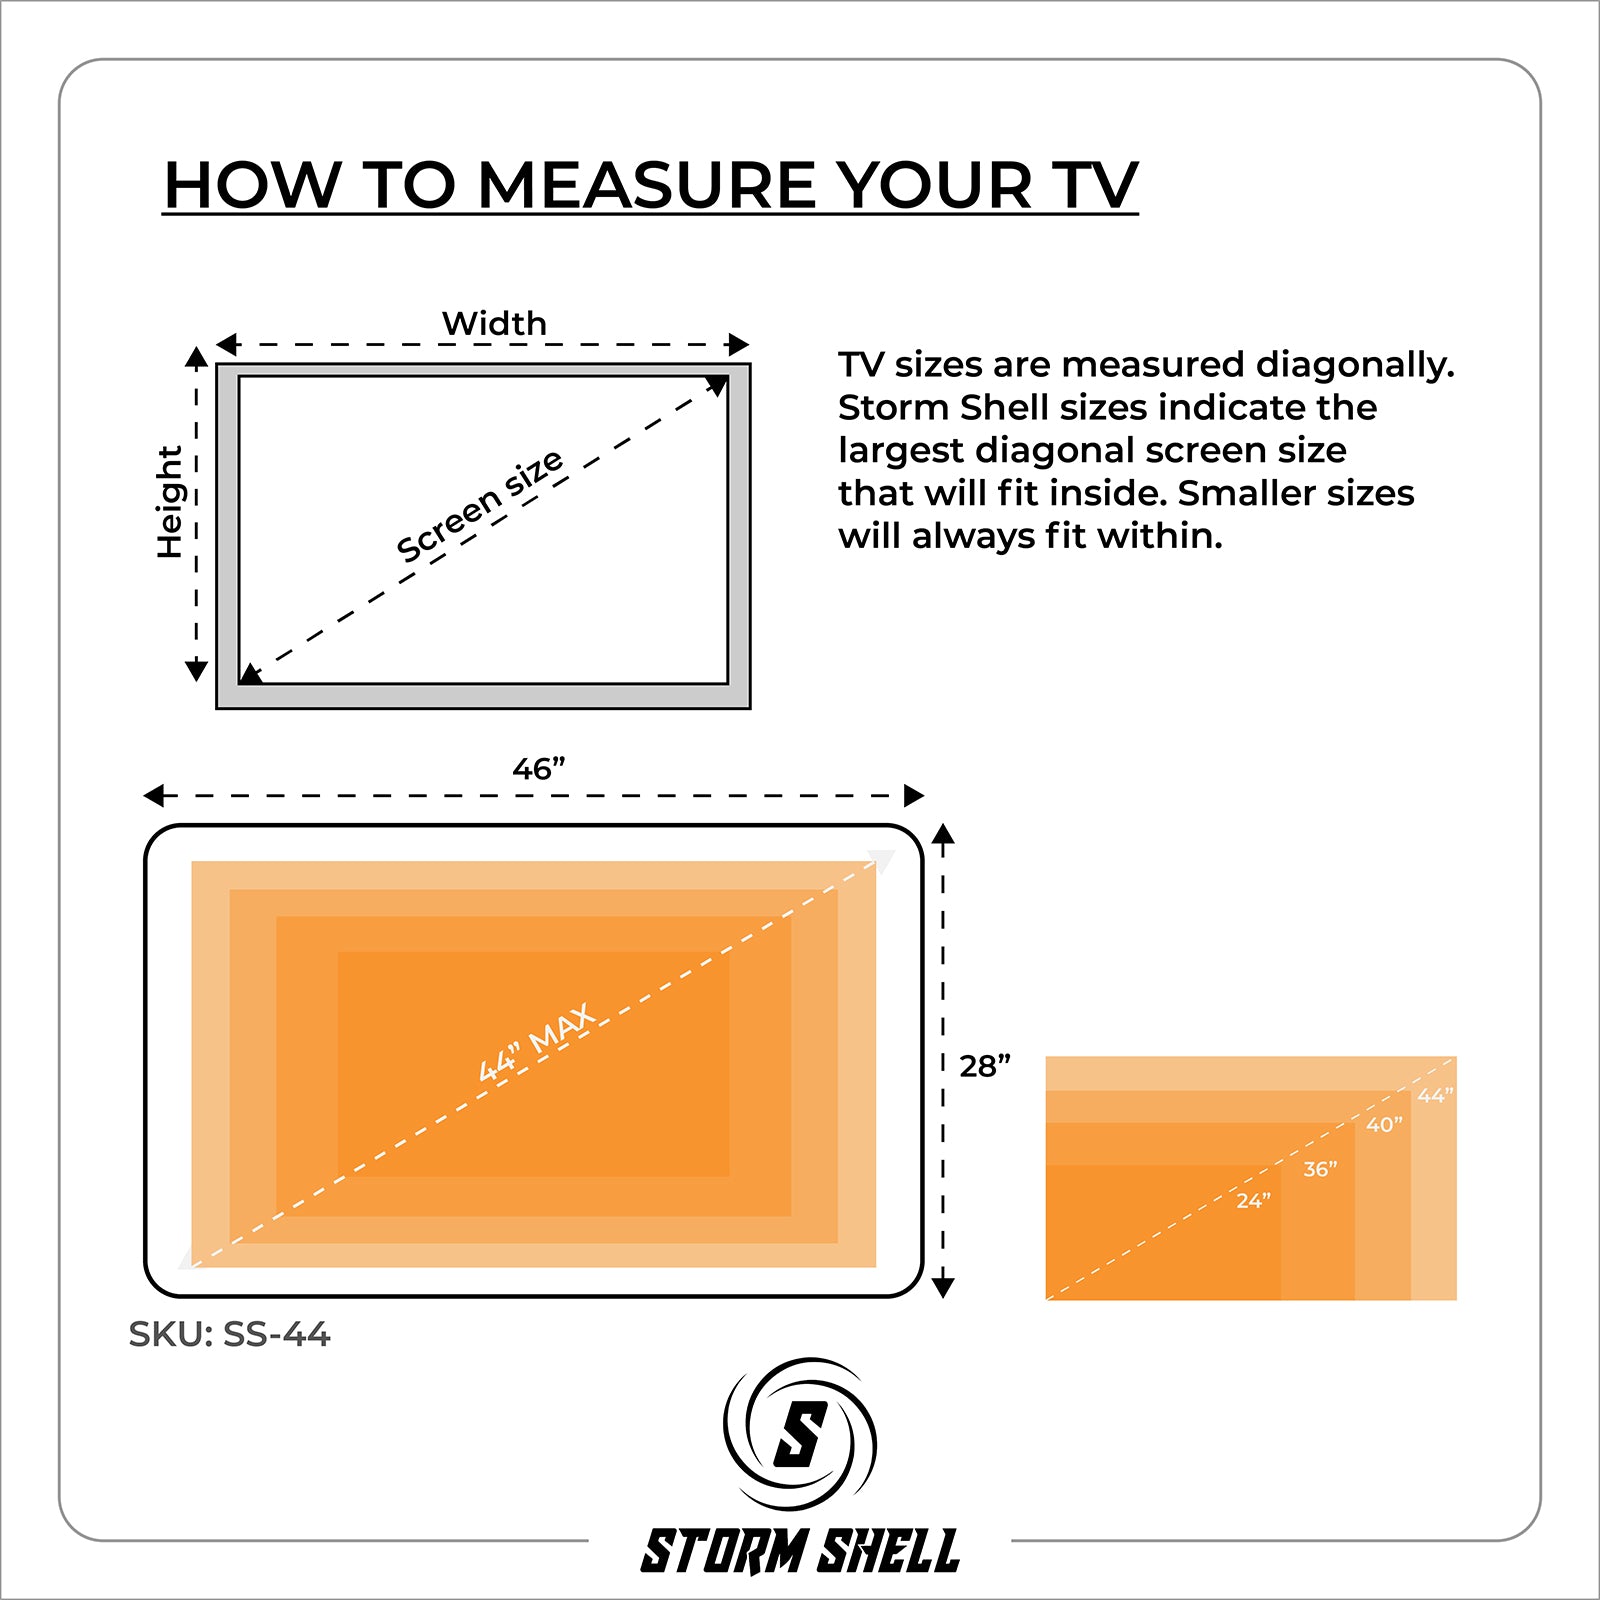 How to measure your TV infographic